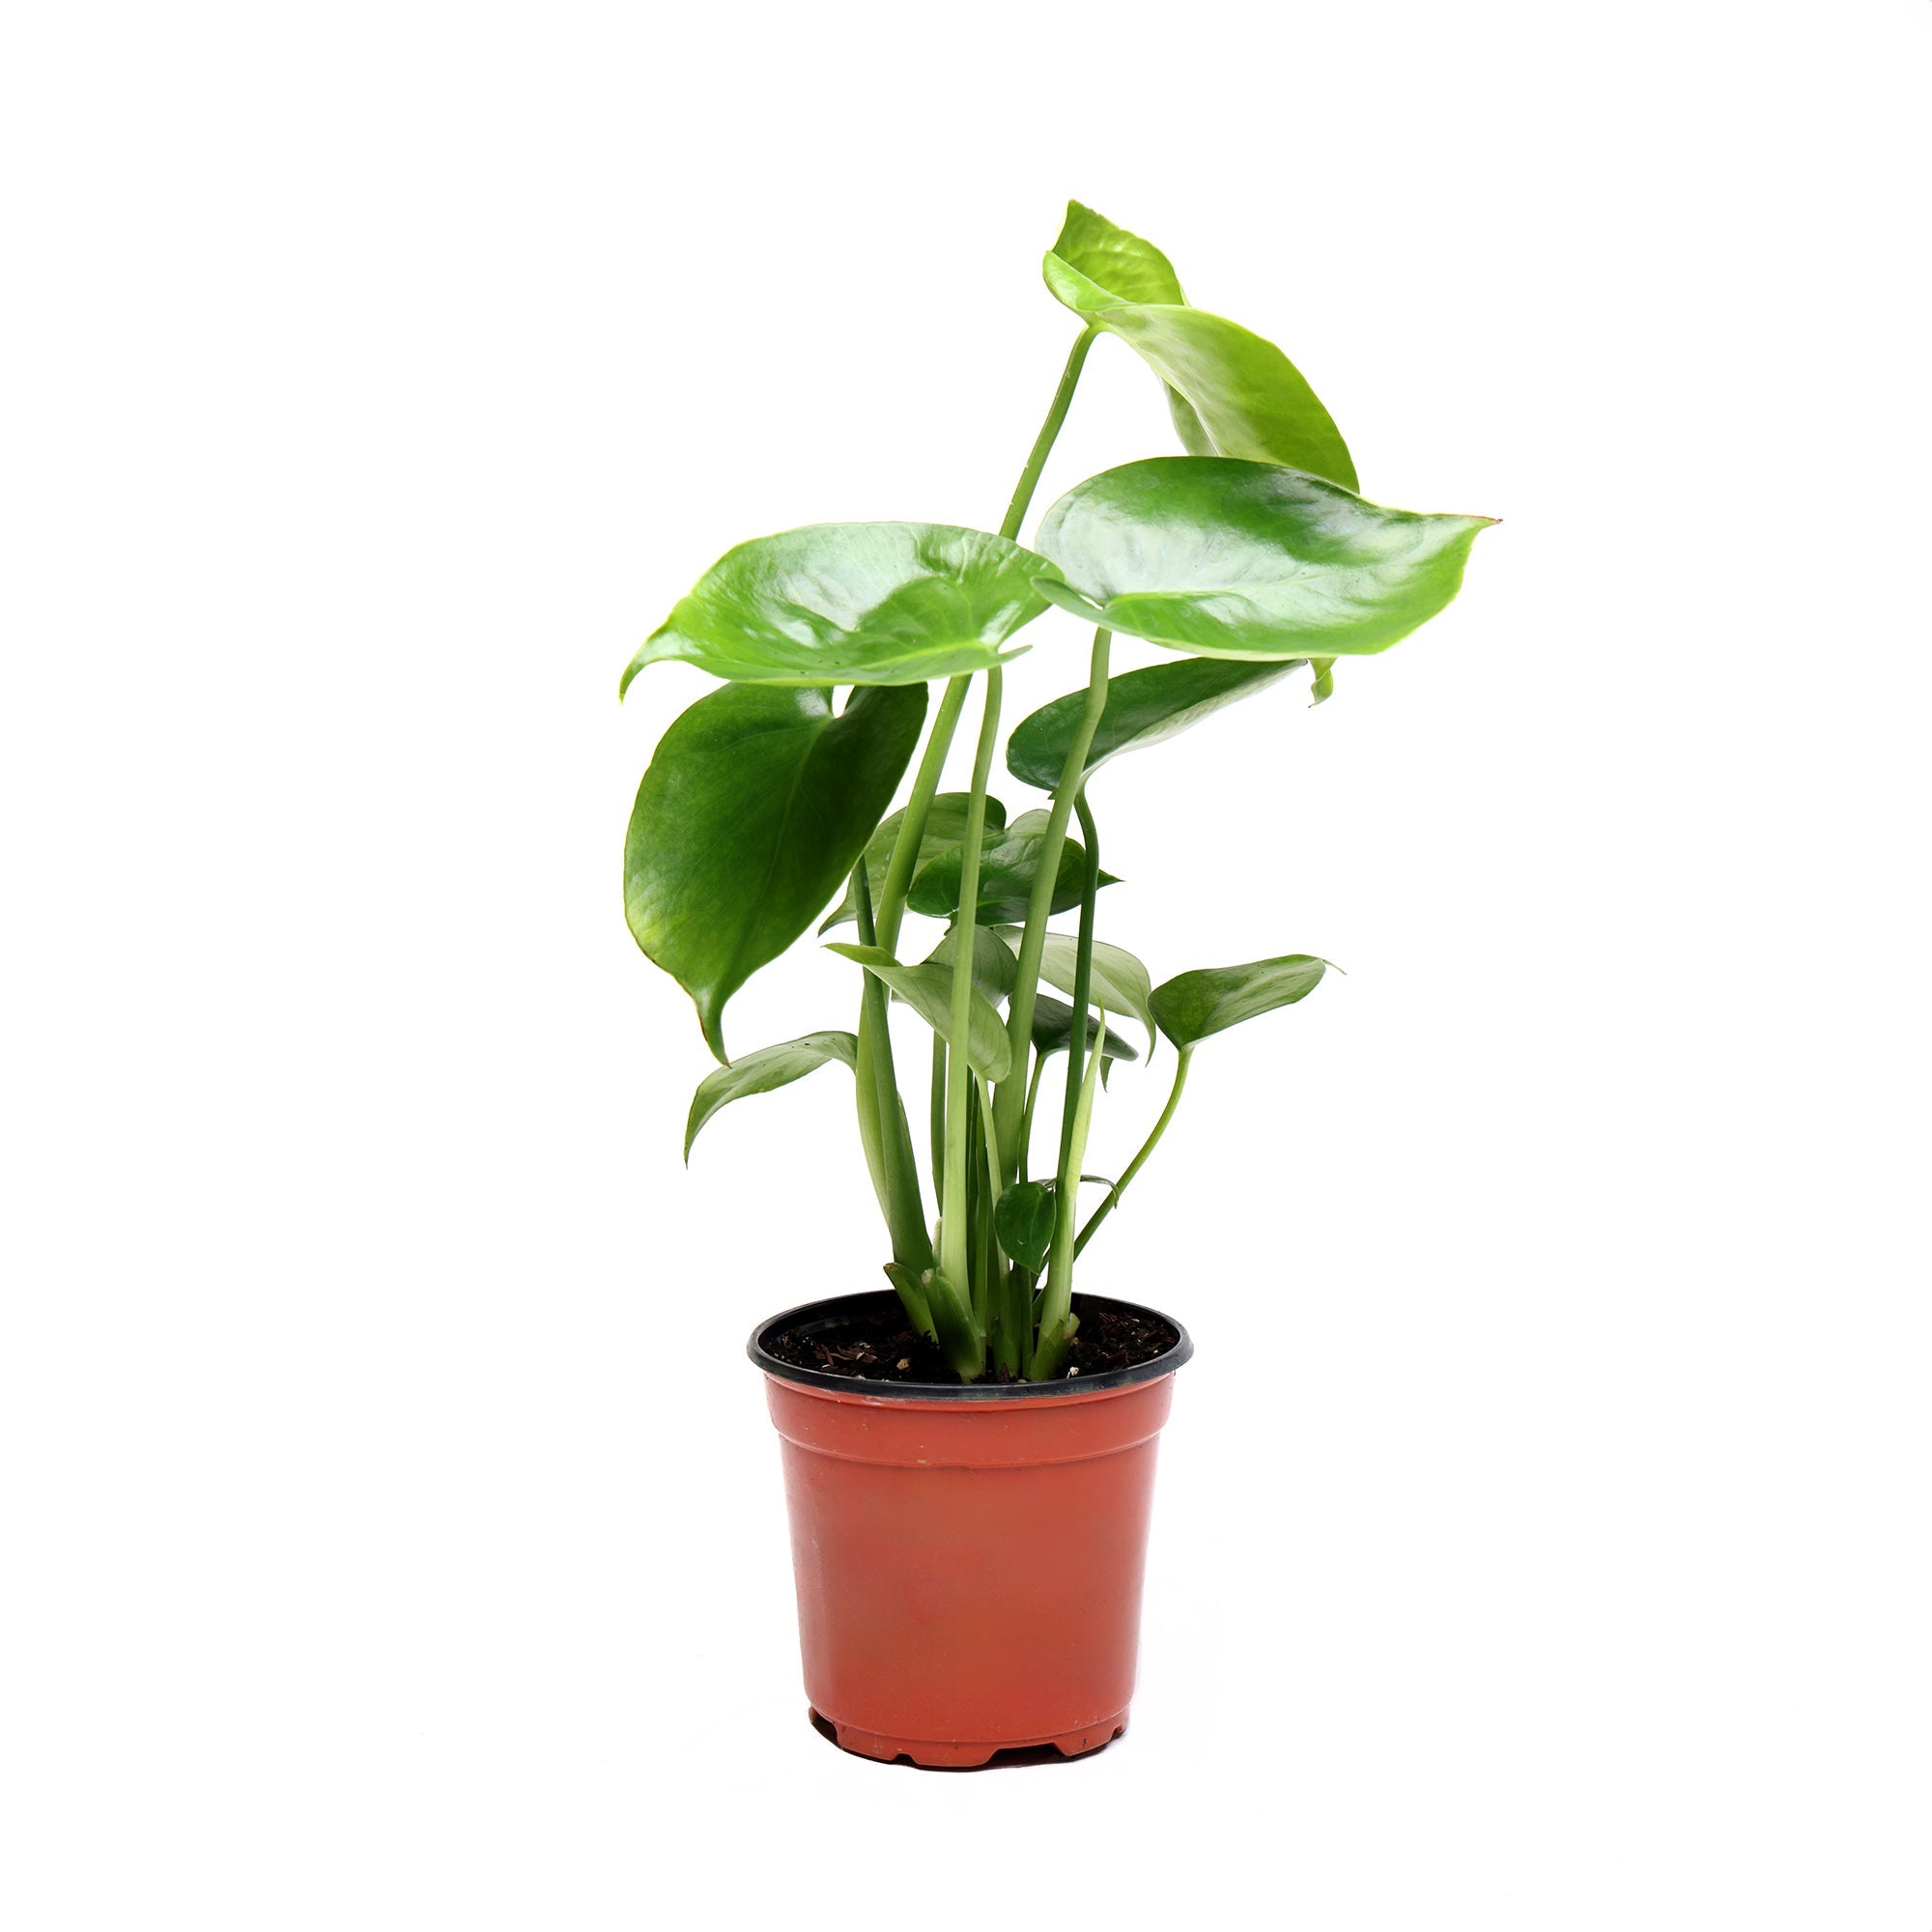 A potted Philodendron Monstera Deliciosa 4 Inches from Chive Studio 2024 with several broad, green leaves growing from its stems. The plant is in a small, round, reddish-brown plastic pot, placed against a plain white background.